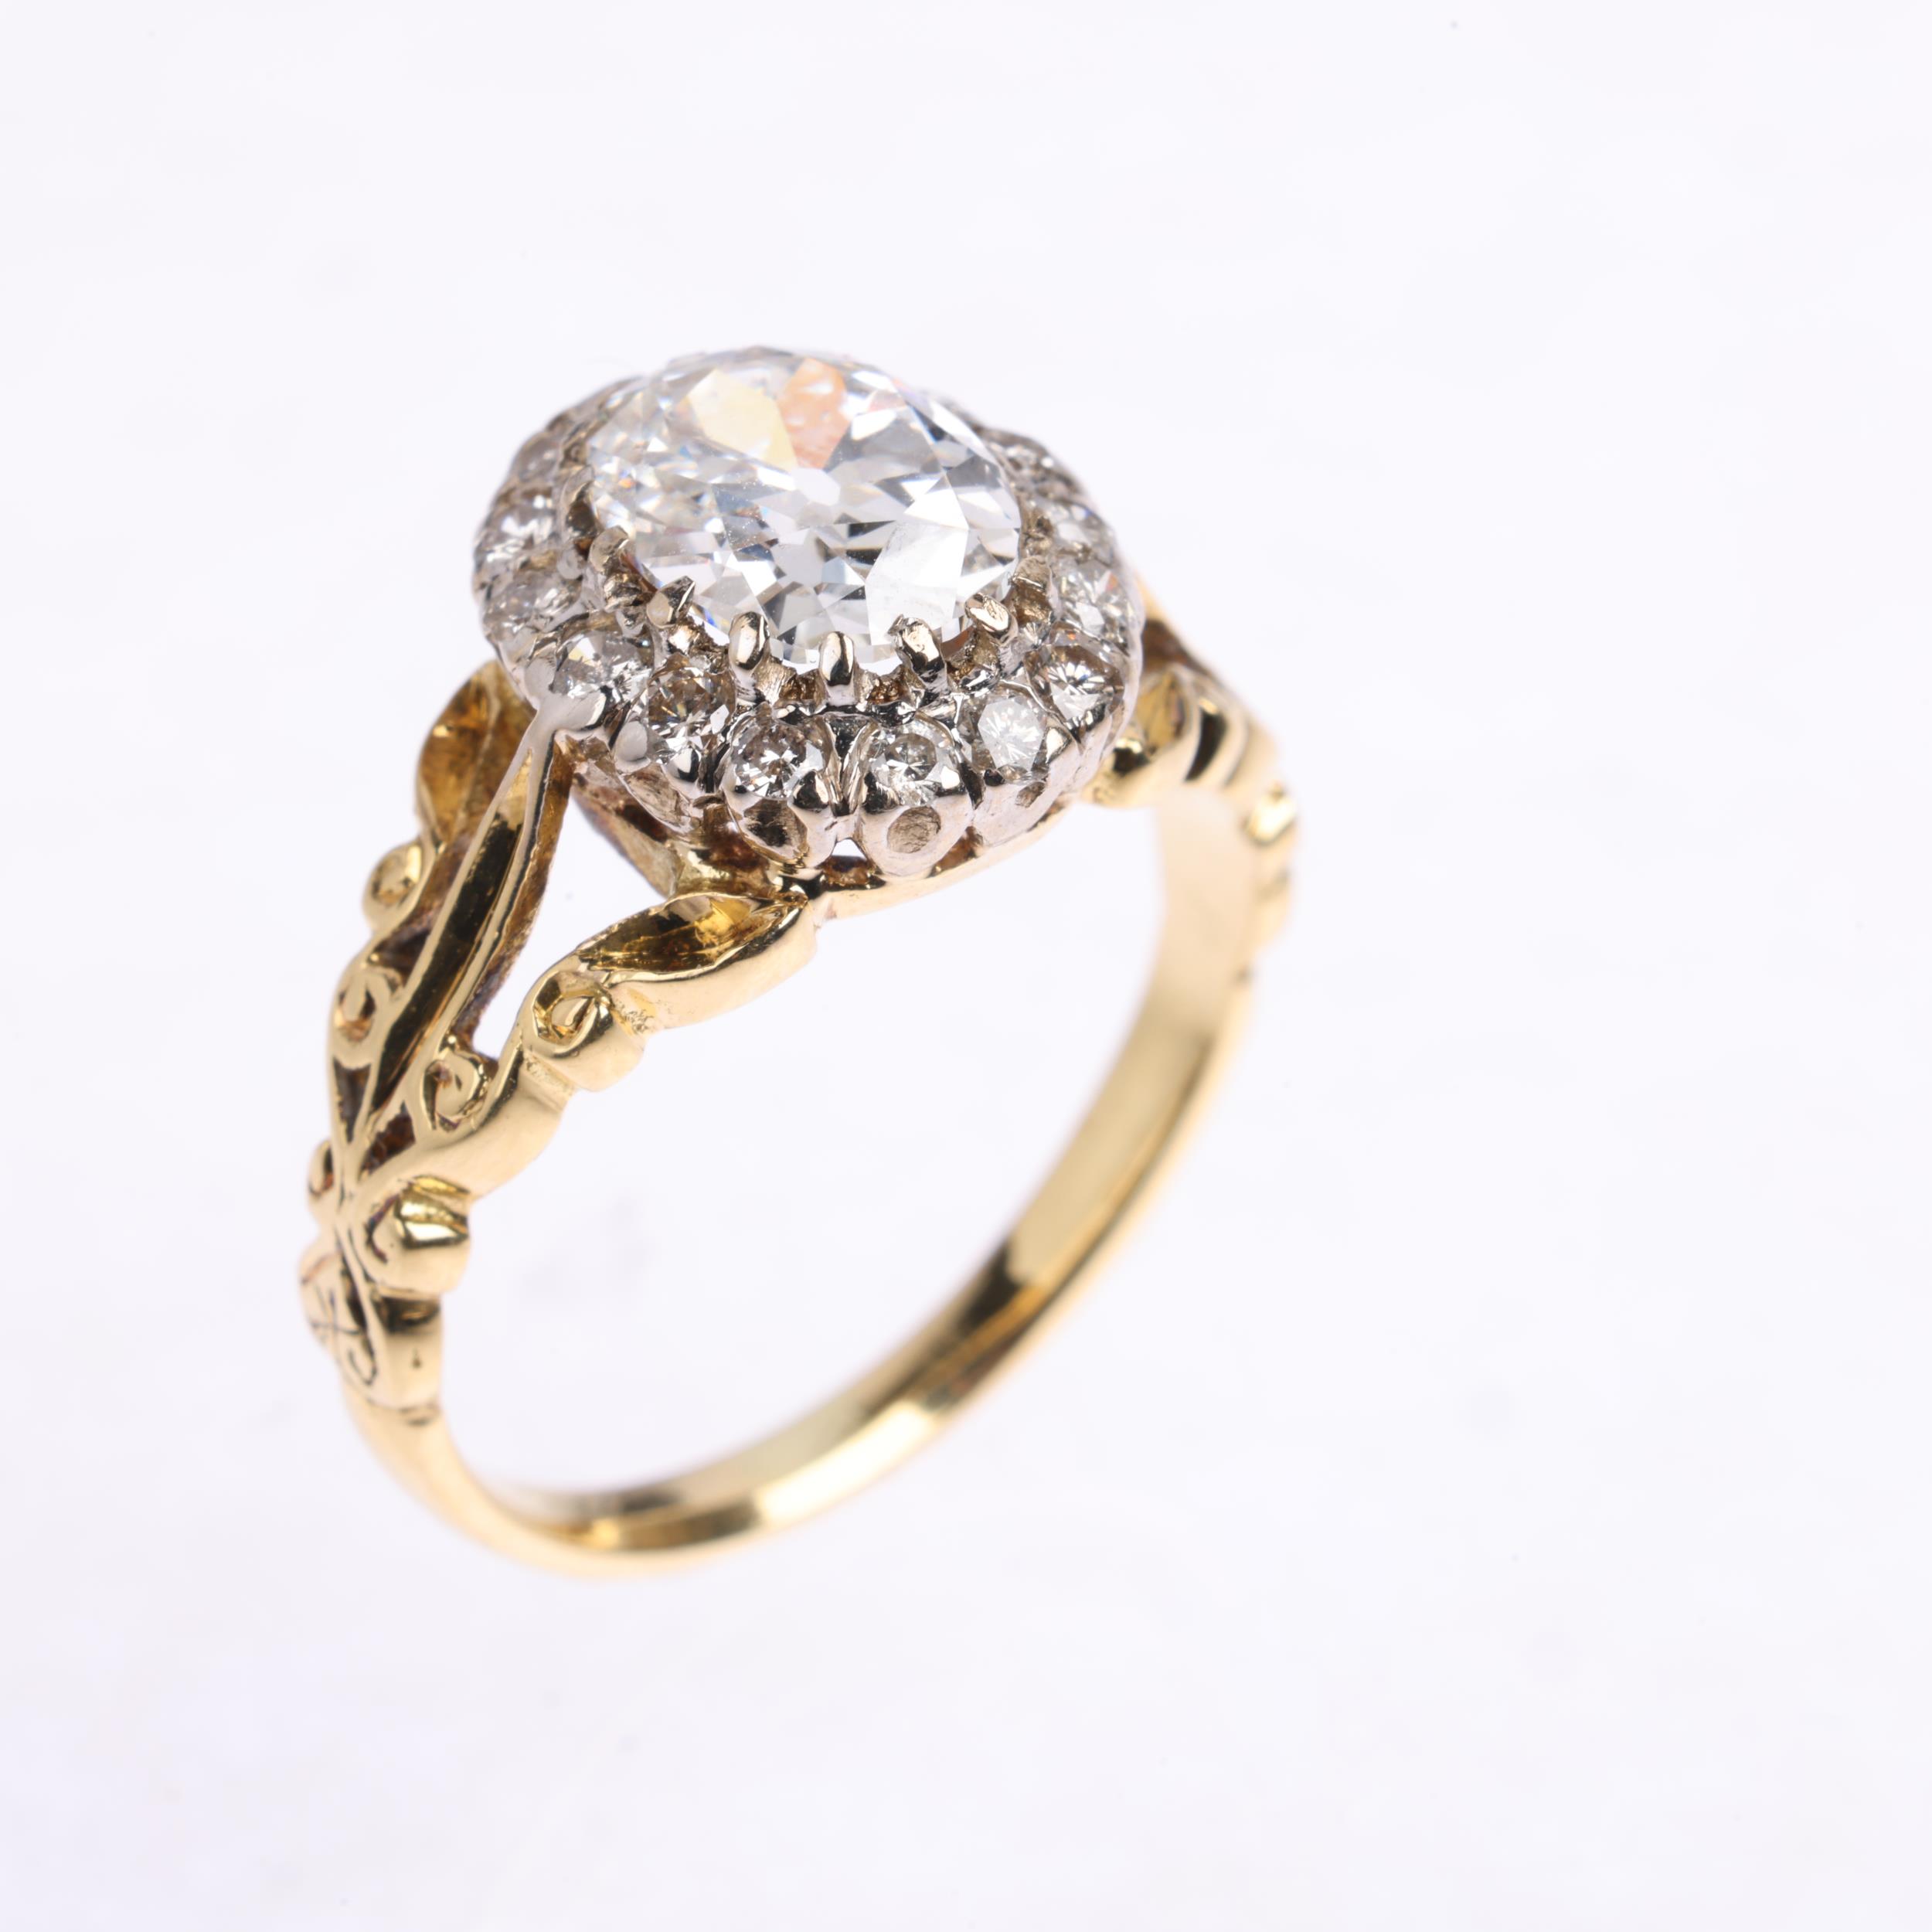 An 18ct gold 1.35ct lab grown diamond cluster ring, centrally claw set with 1.3ct oval mixed-cut lab - Image 2 of 4